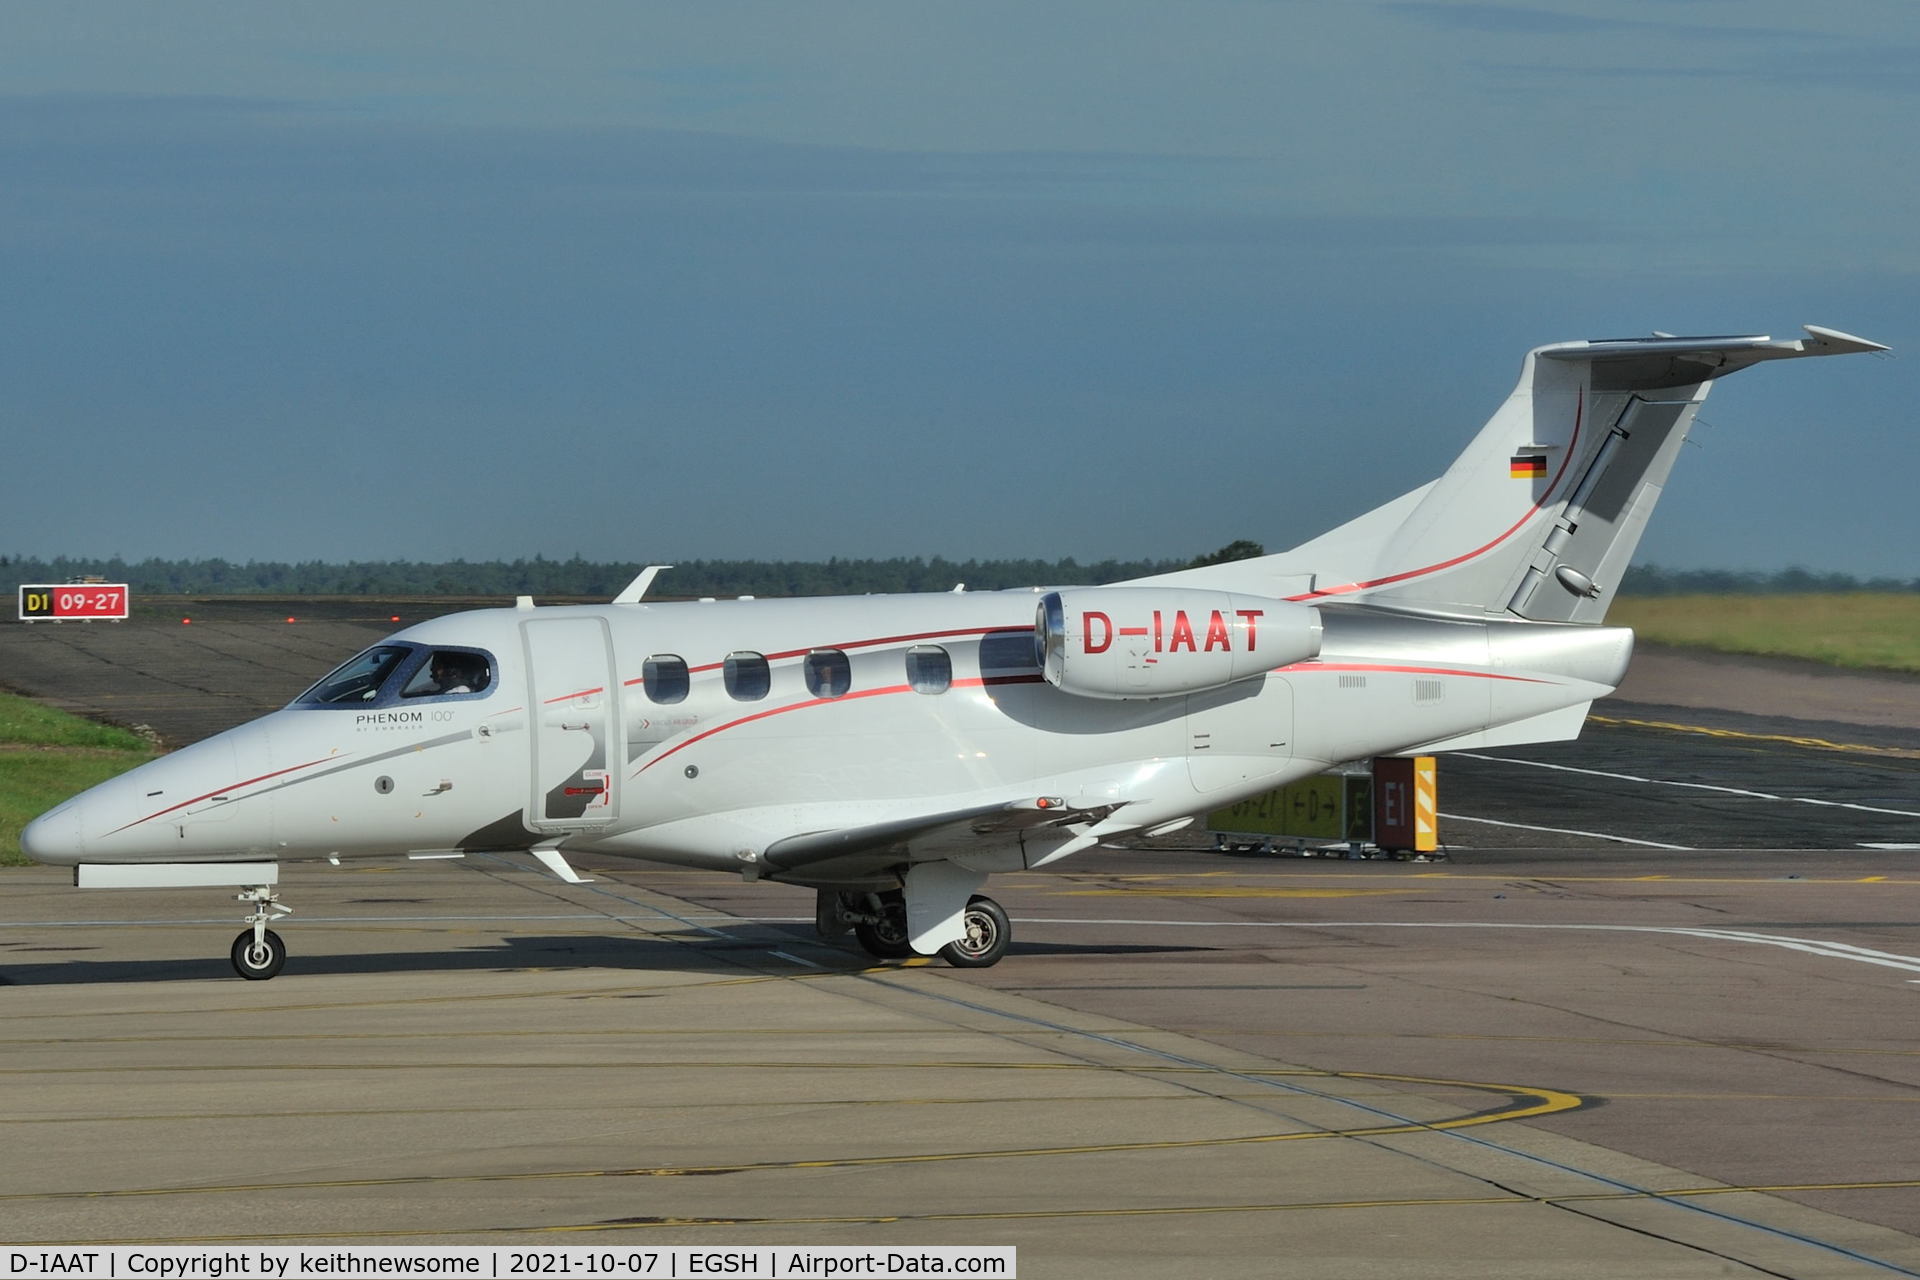 D-IAAT, 2010 Embraer EMB-500 Phenom 100 C/N 50000162, Arriving at Norwich from Nice, France.